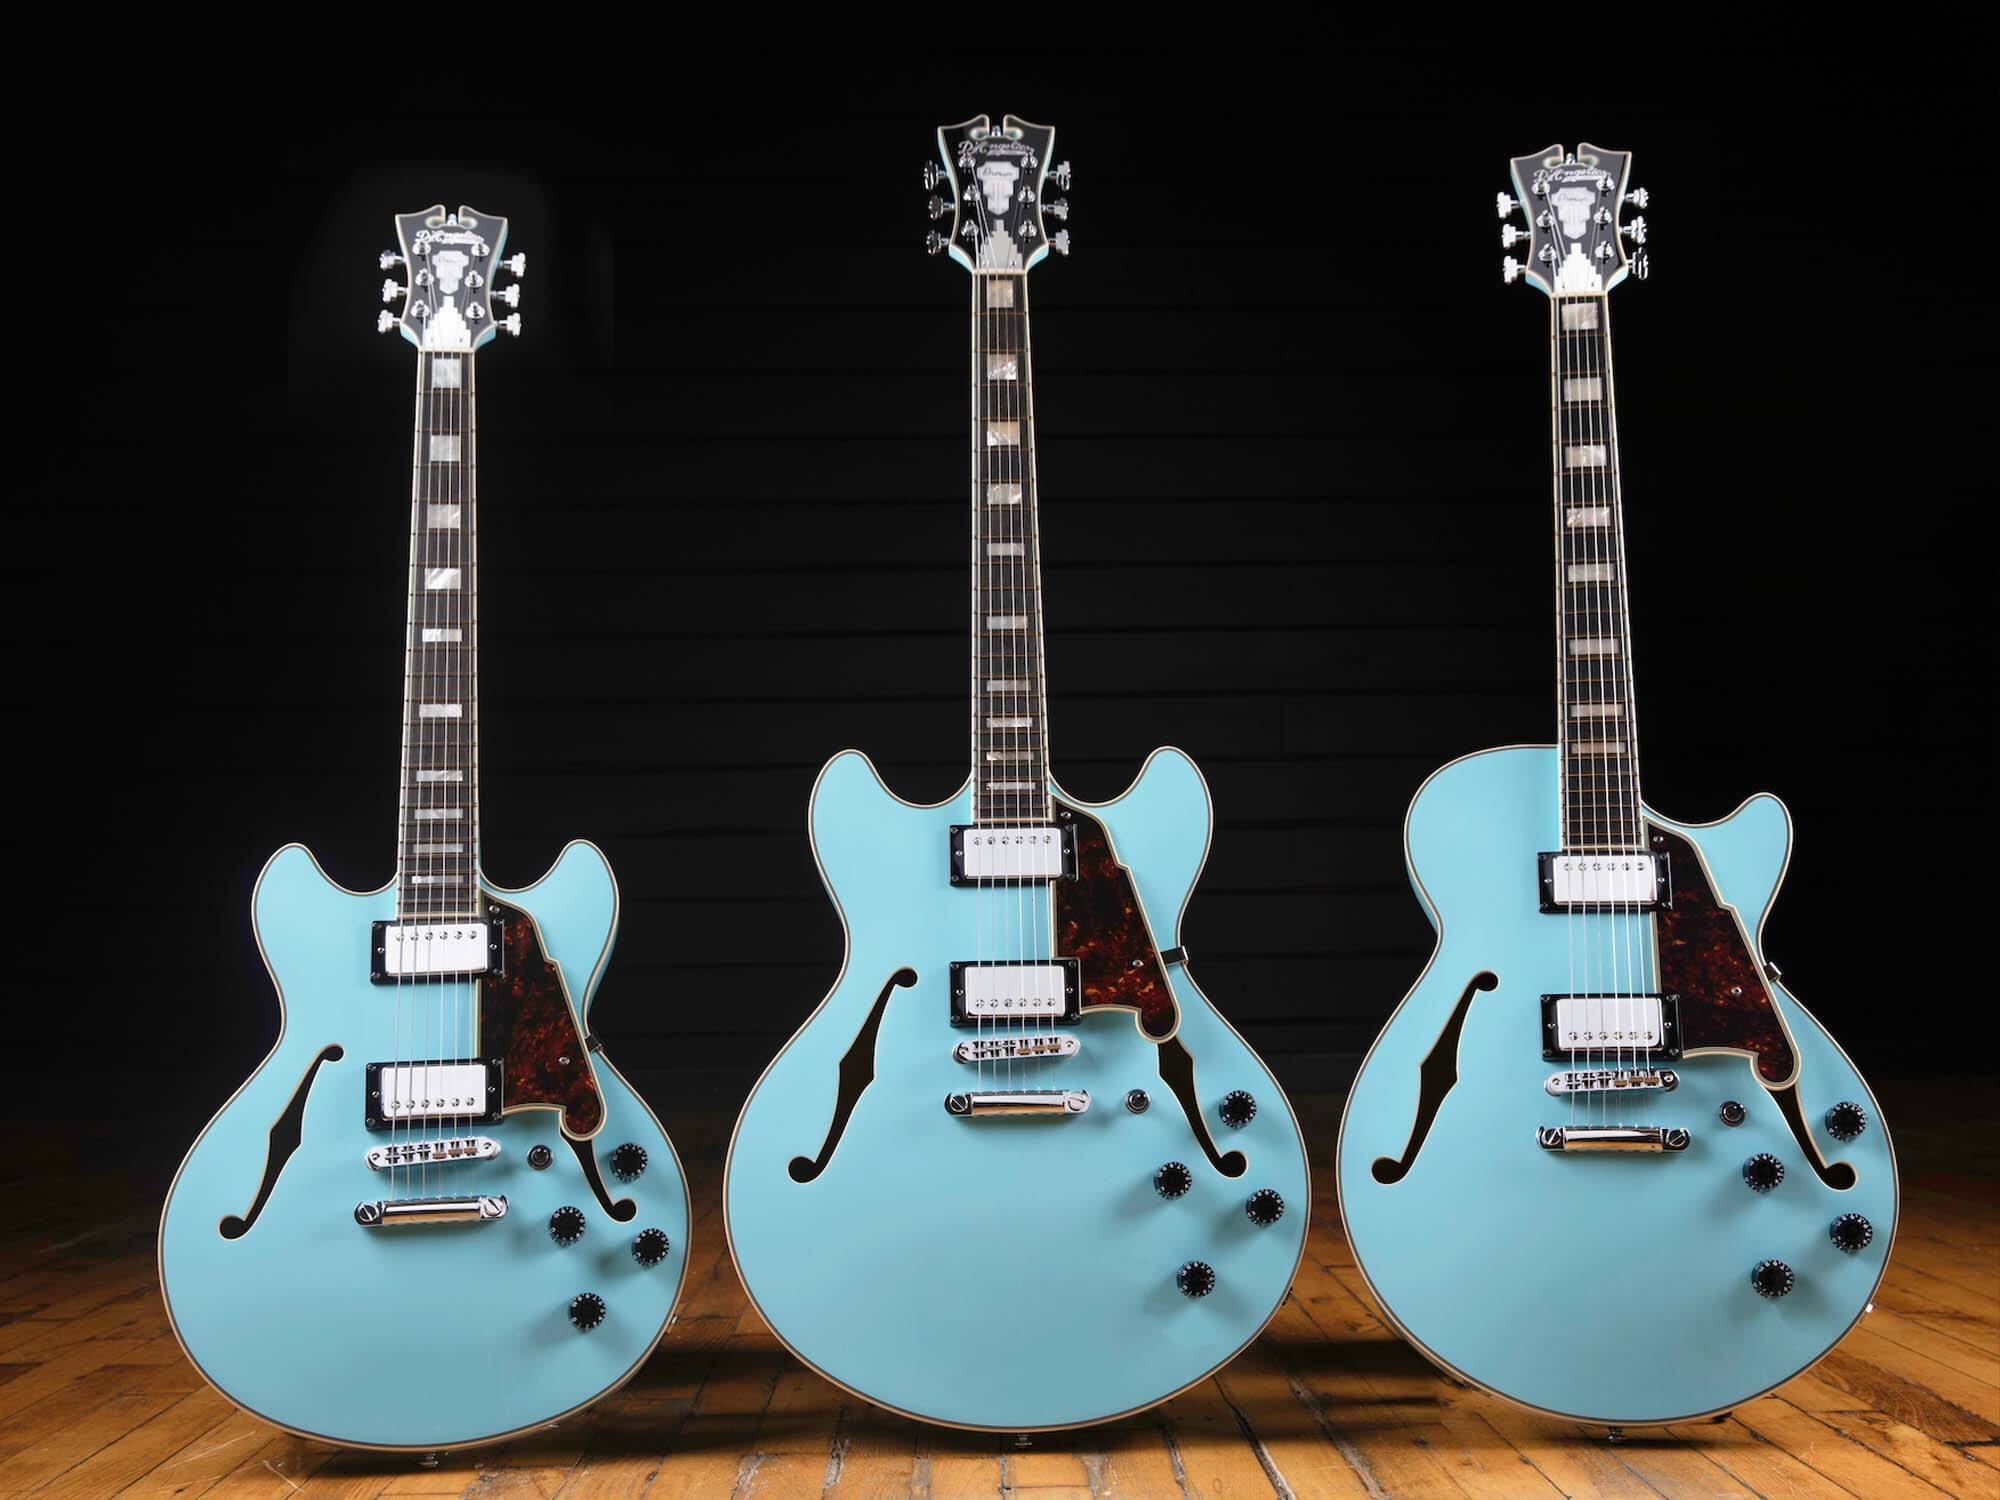 Sky blue D'angelico finish